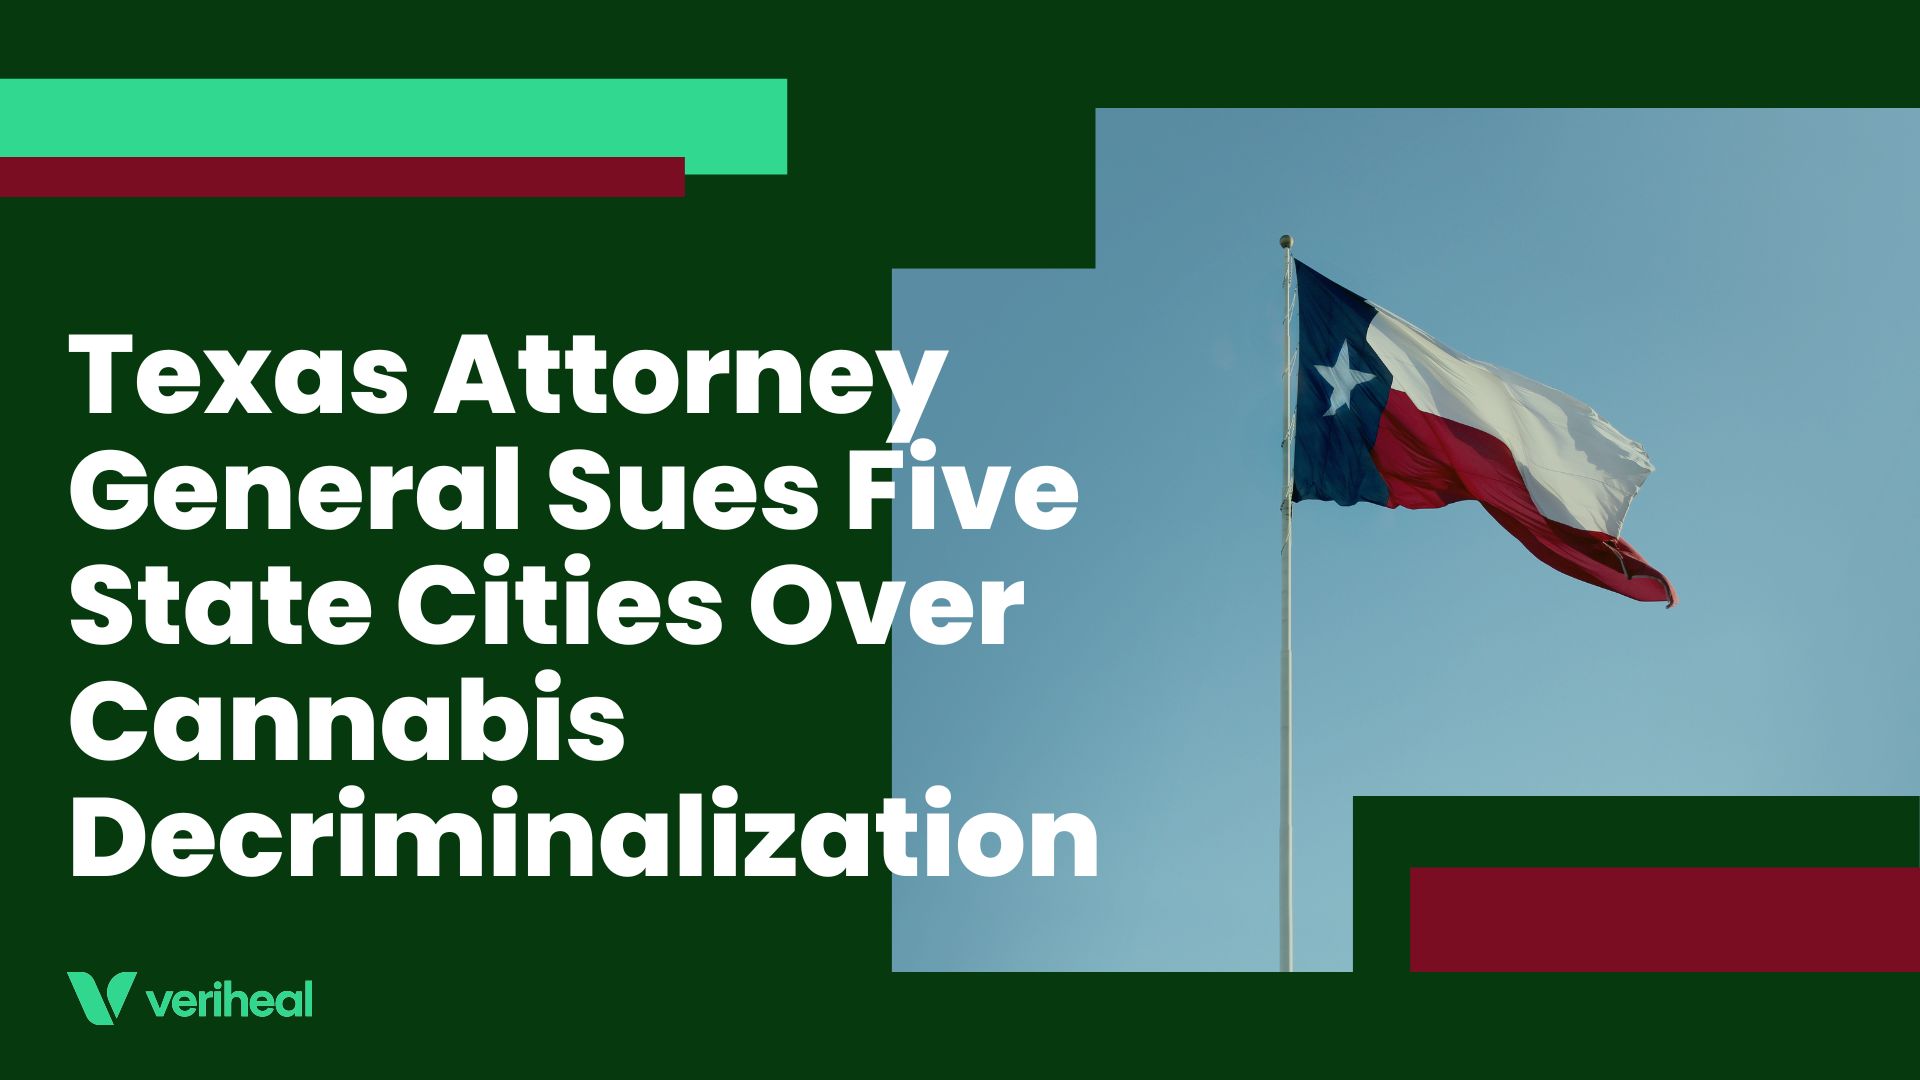 Texas Attorney General Sues Five State Cities Over Cannabis Decriminalization